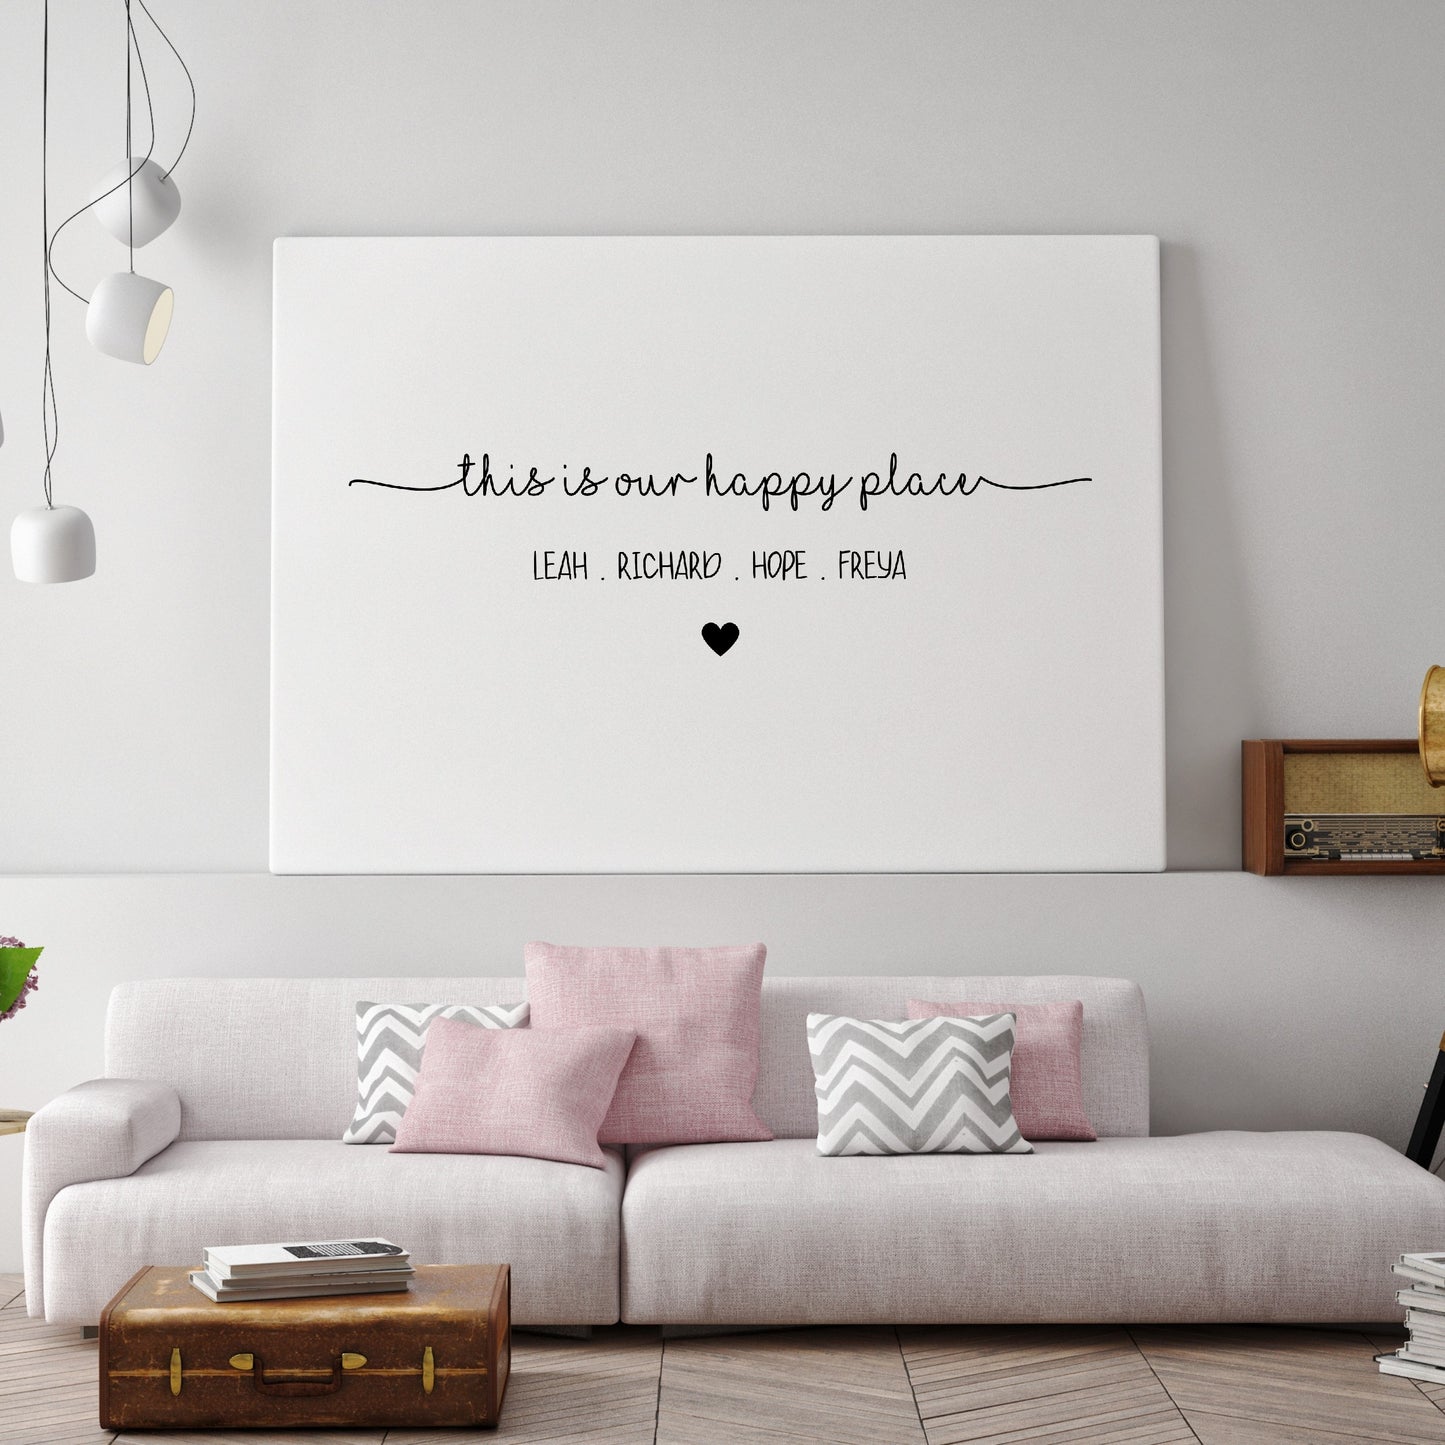 Family Print | This Is Our Happy Place | Personalised Print